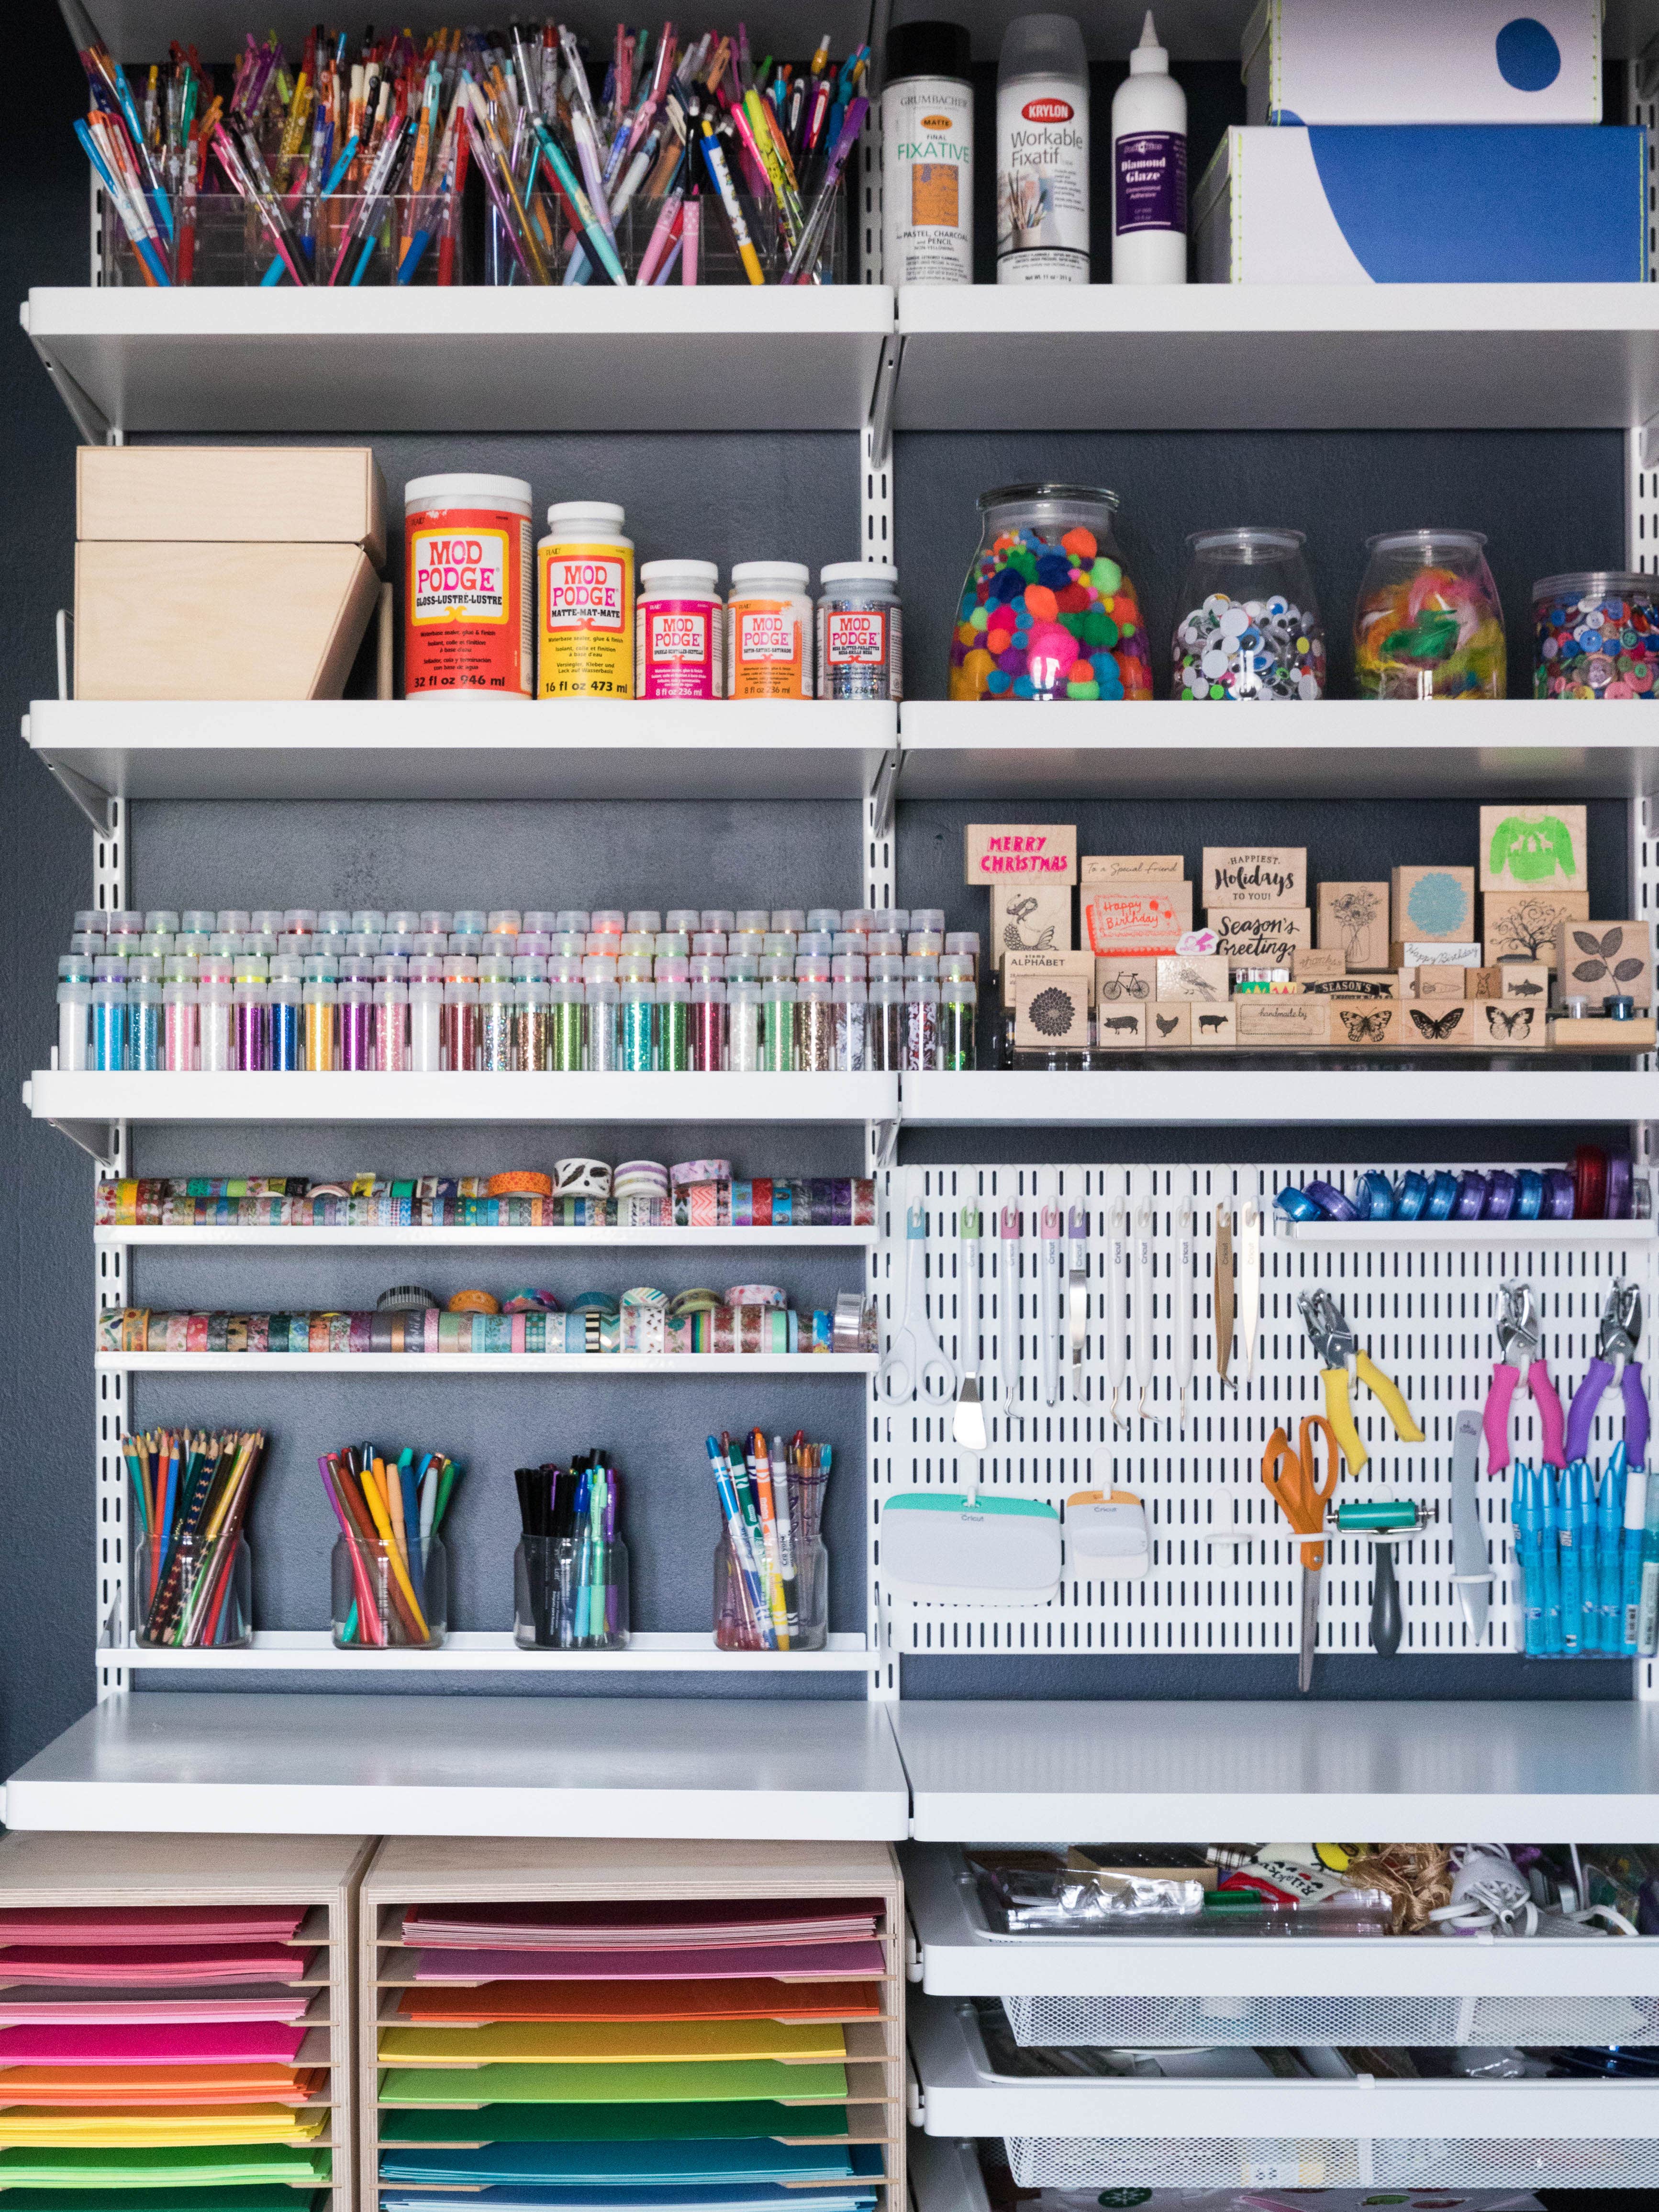 This Perfectly Organized Craft Room Is So Pleasing to Look At